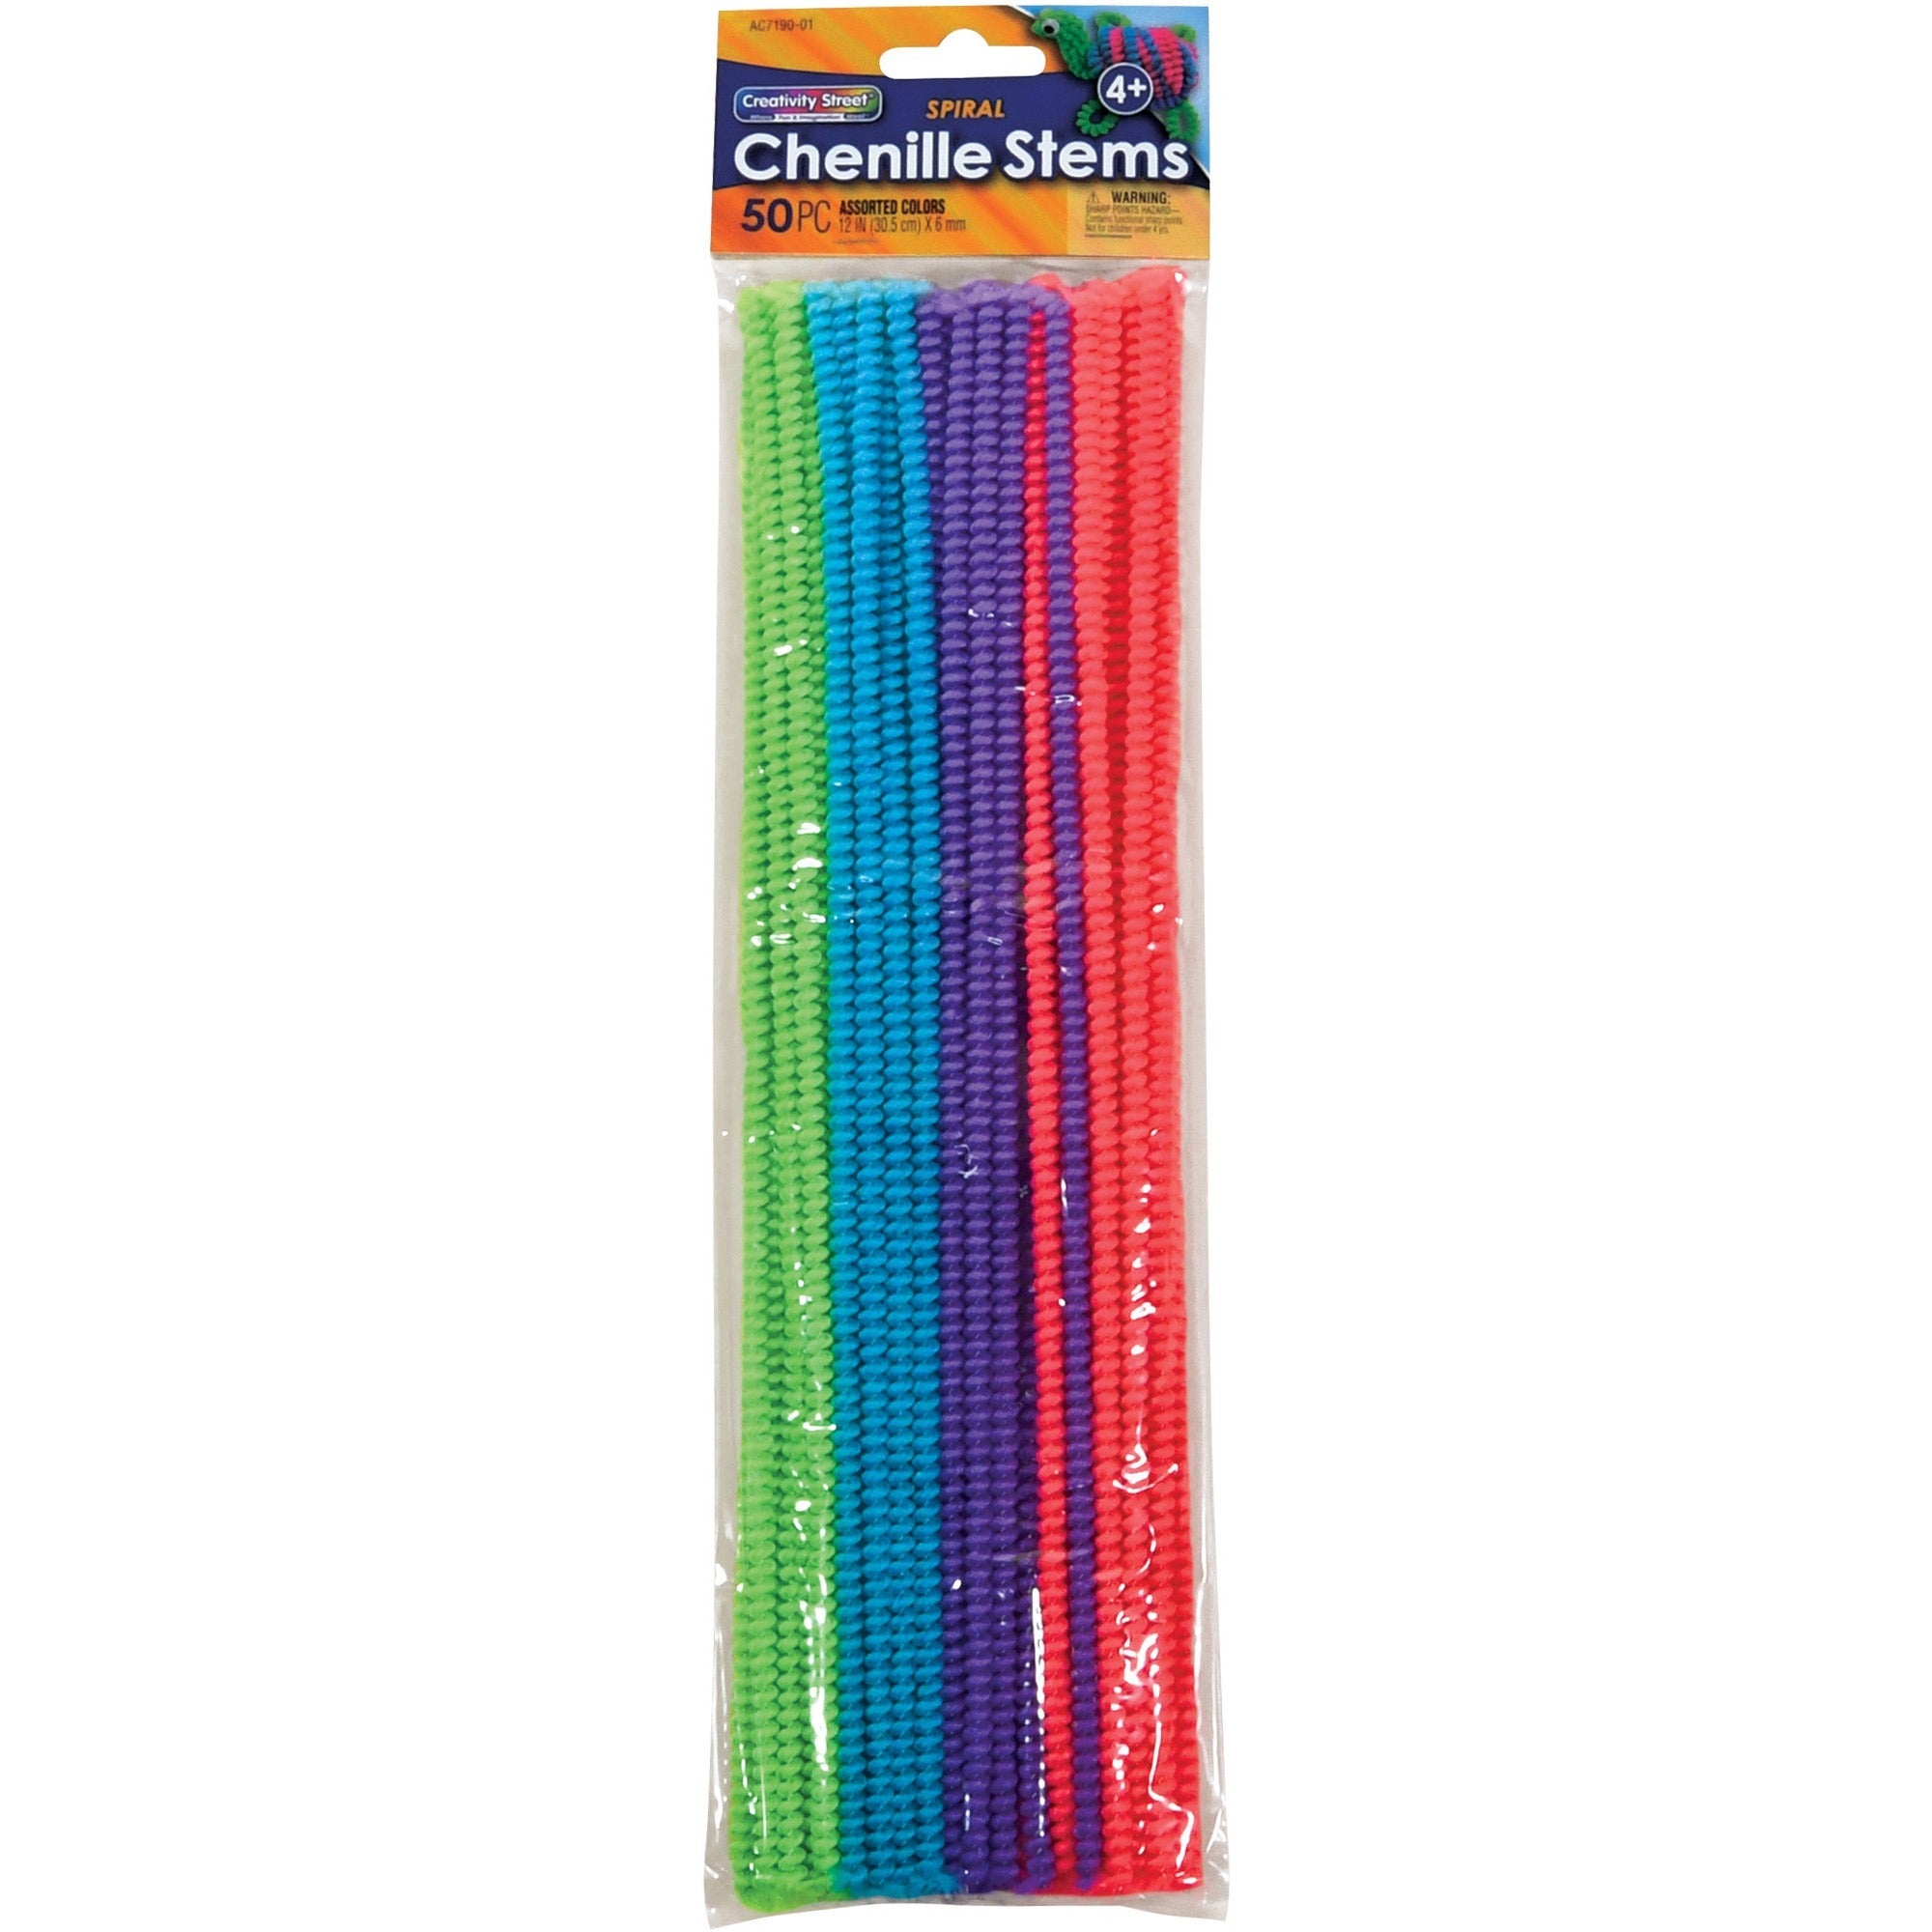 creativity-street-spiral-chenille-stems-classroom-home-art-project-recommended-for-4-year-12height-x-020width-x-020length-50-bag-assorted_pacac719001 - 1